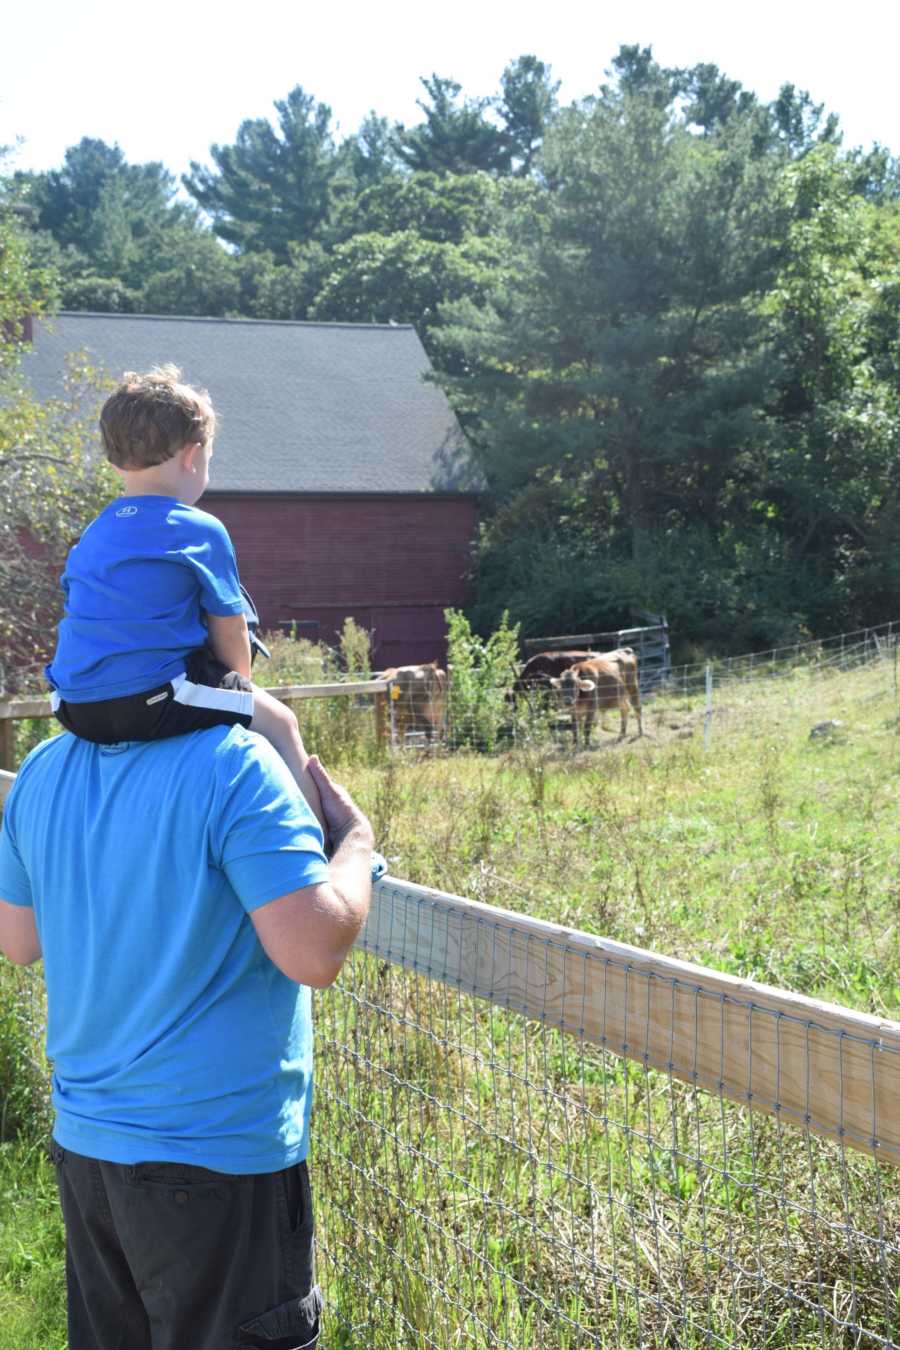 Father stands with young child on his shoulder beside fence at they look at cows